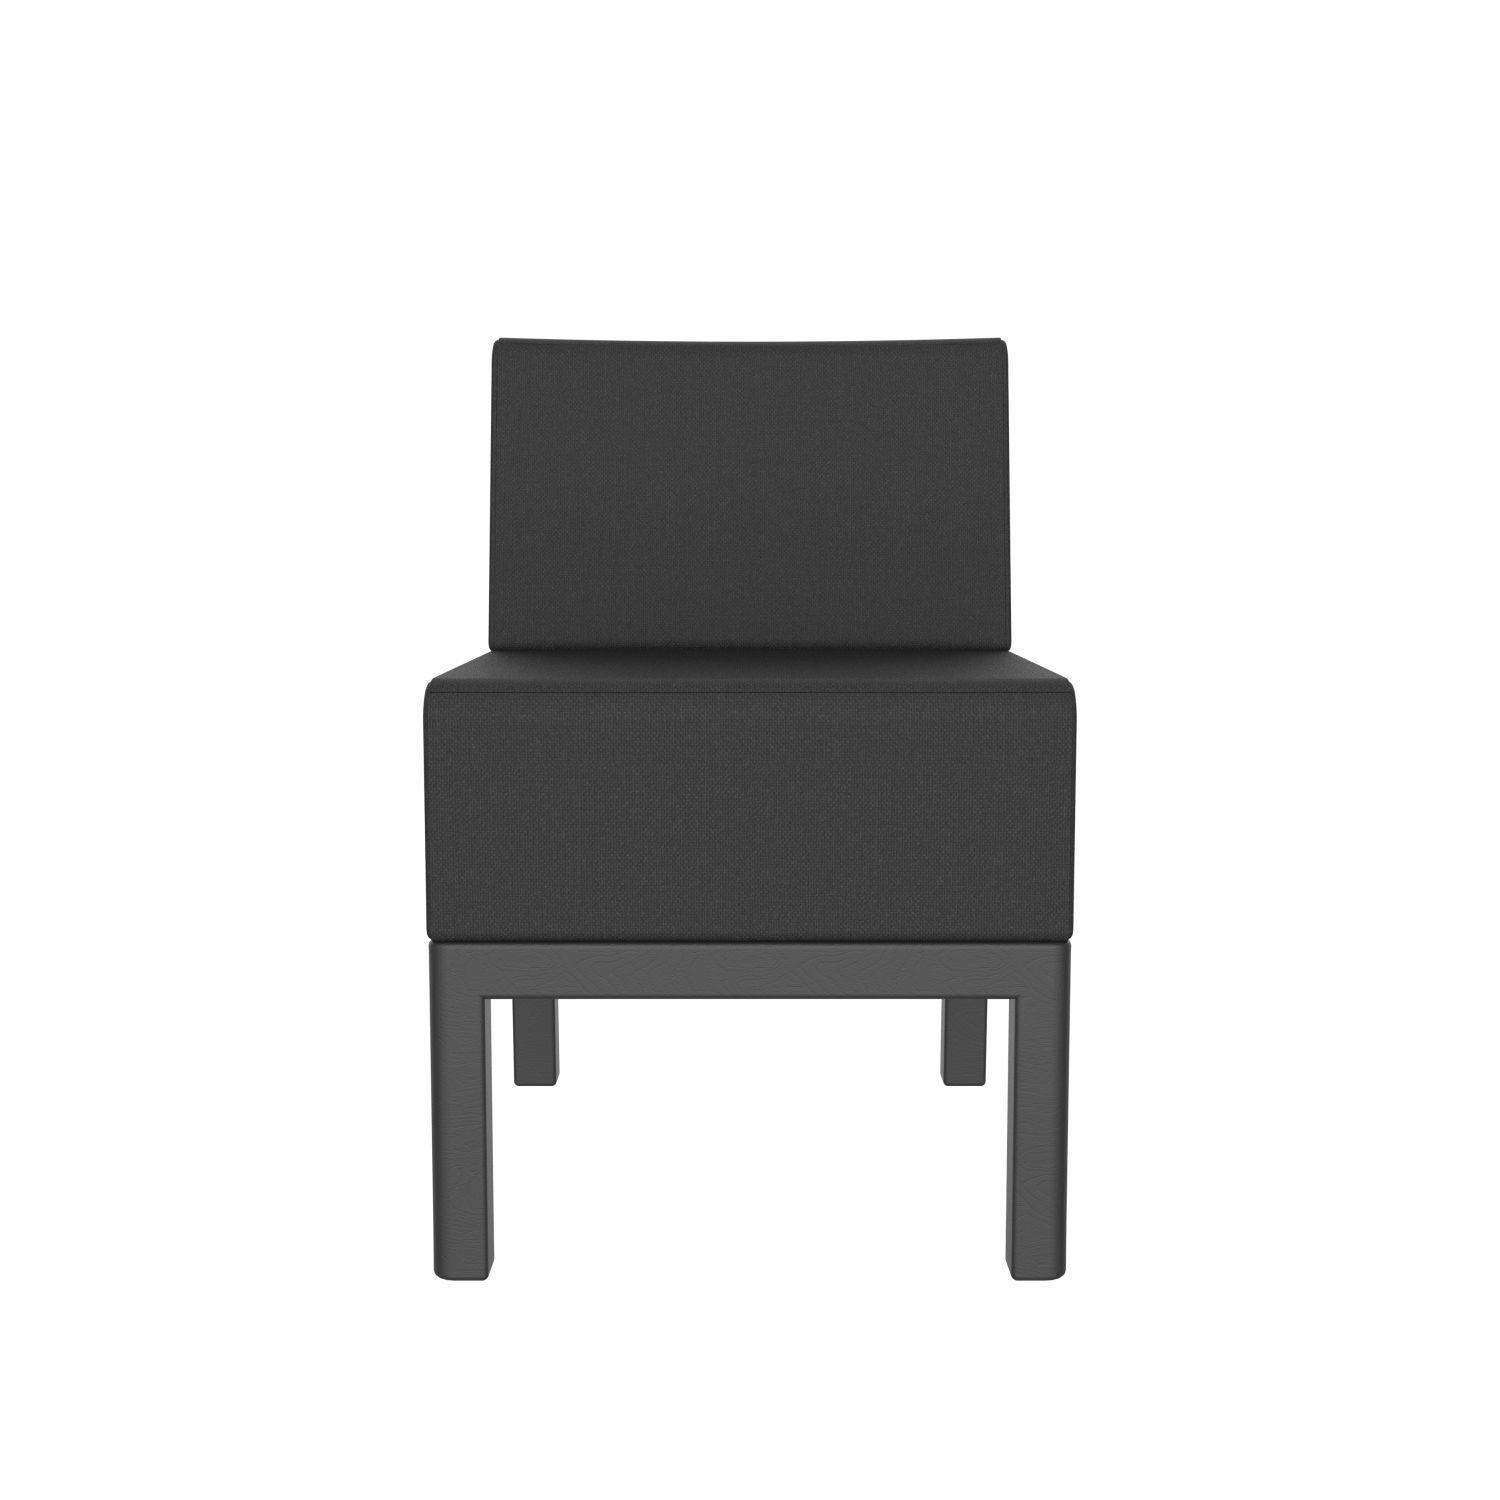 lensvelt piet boon chair 01 without armrests board graphite 66 price level 1 signal black ral9004 hard leg ends